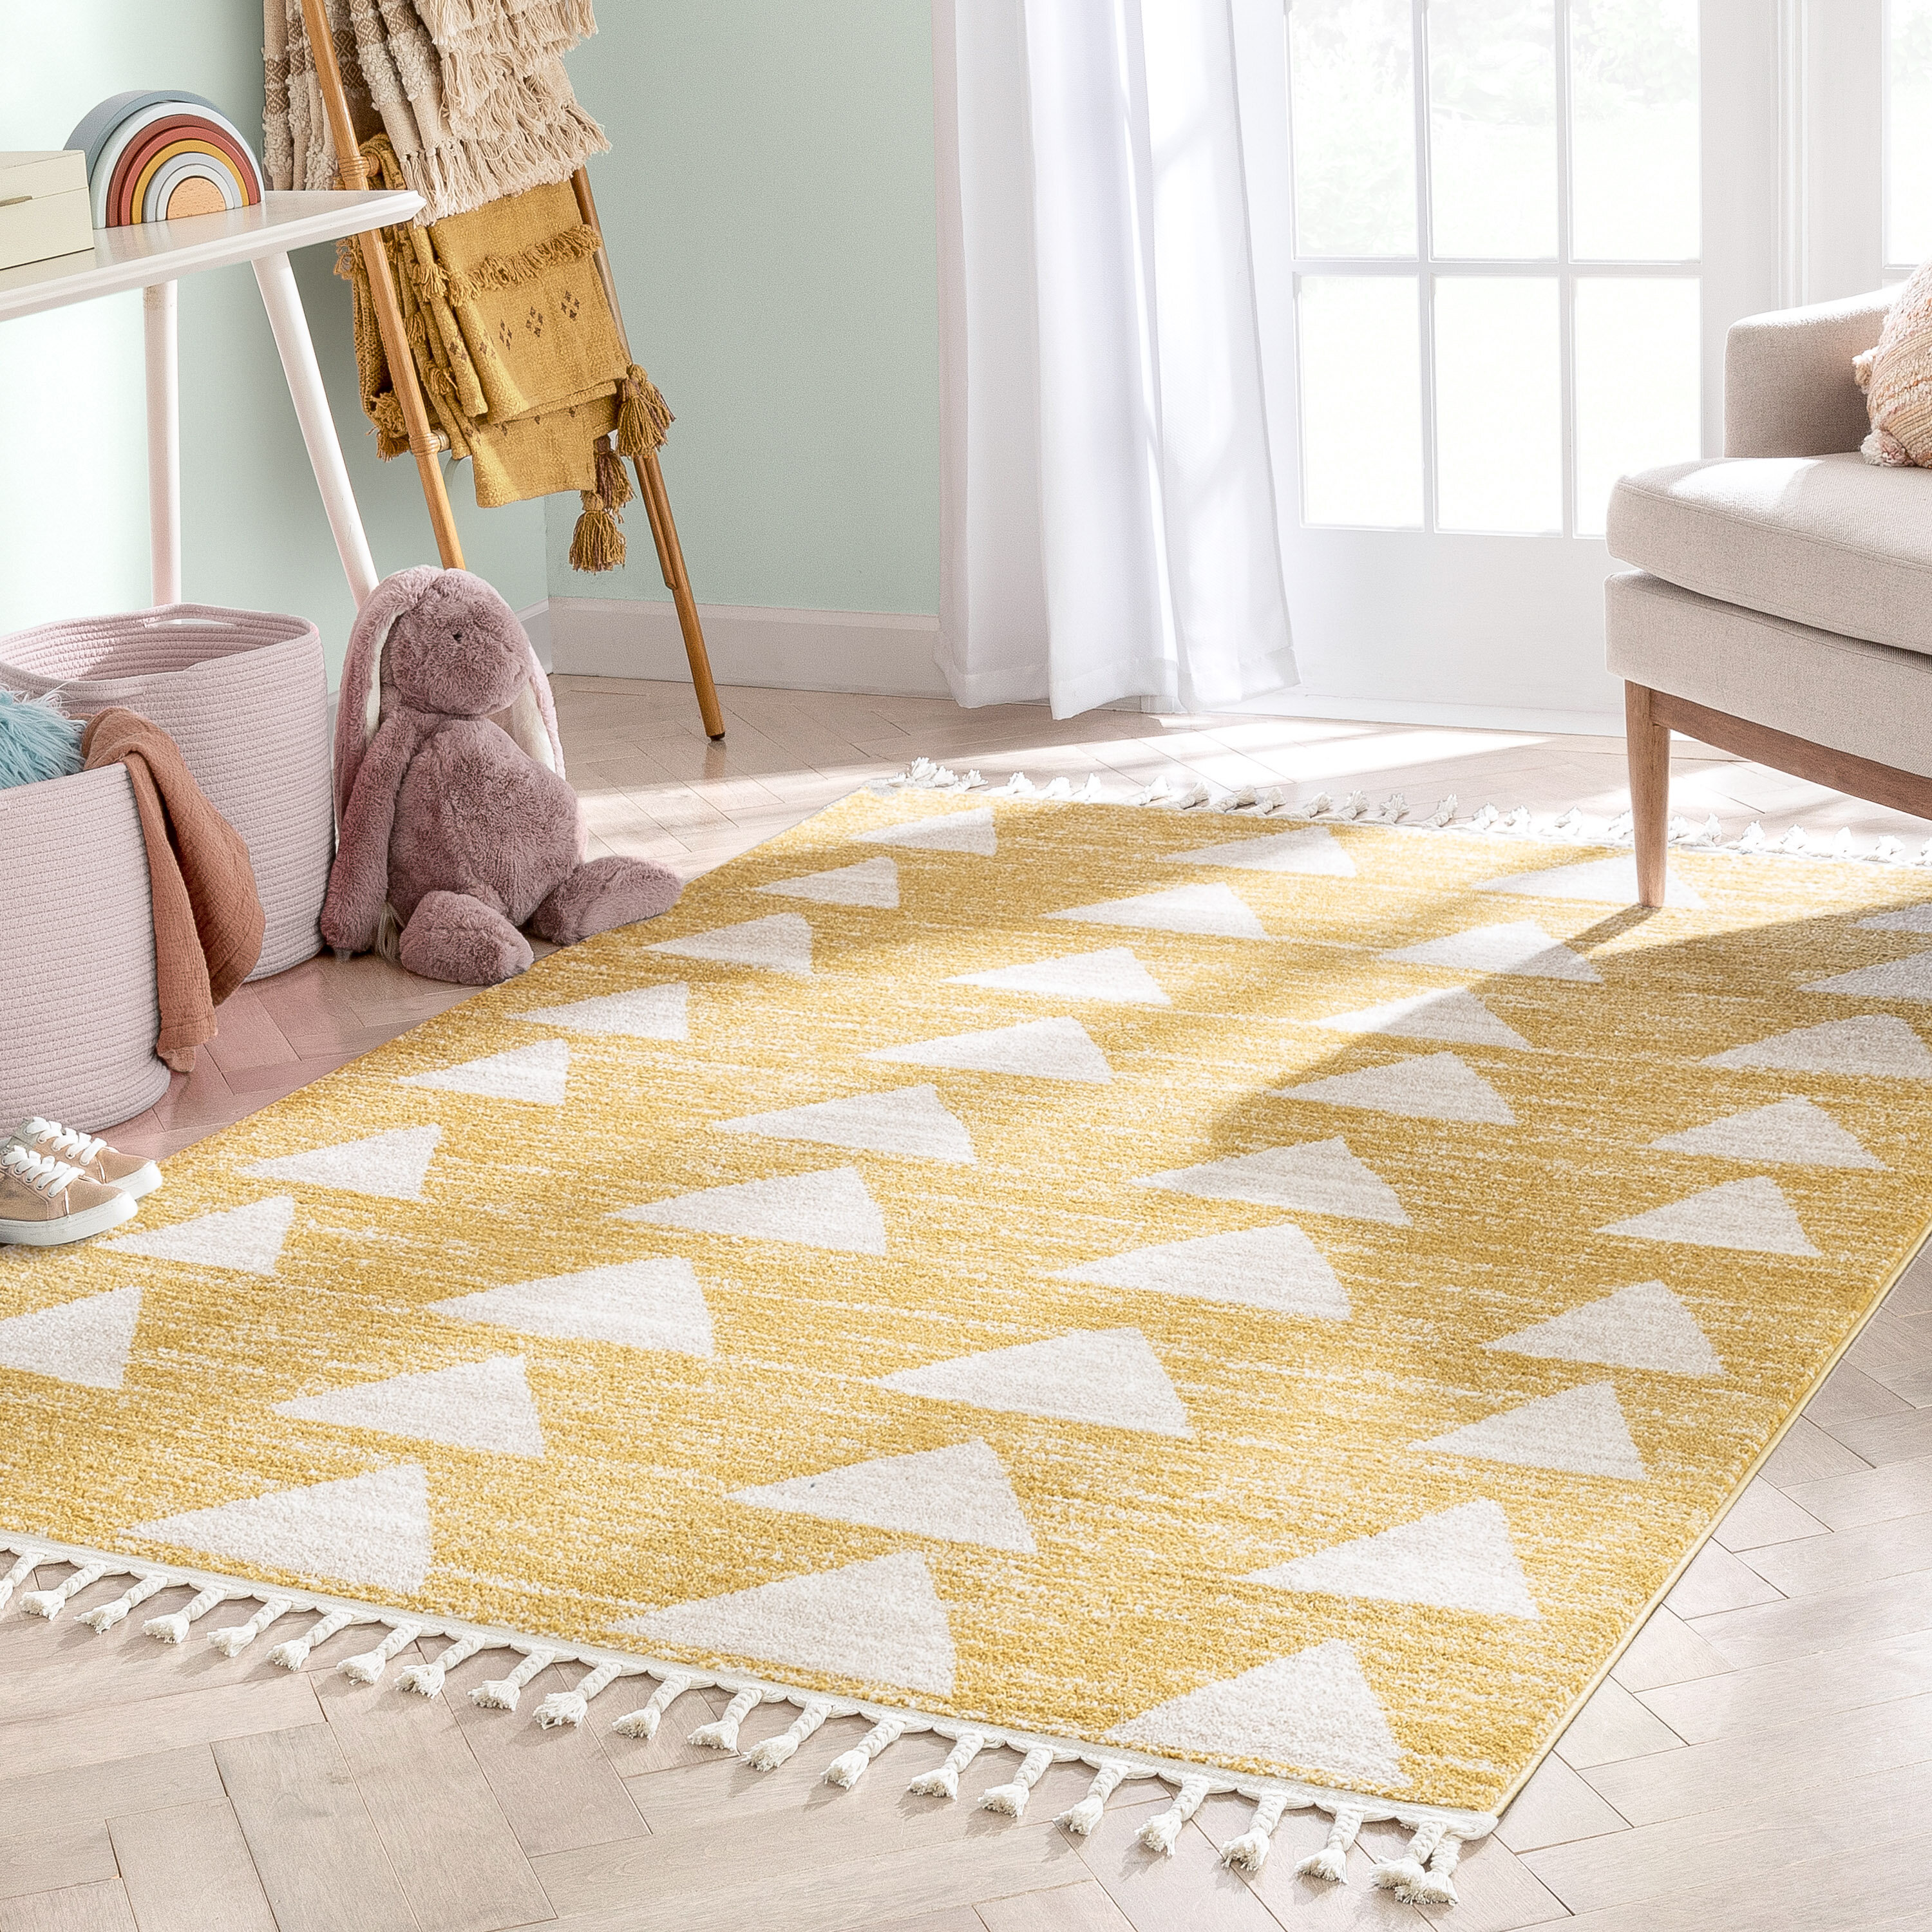 Discounted Mats, Rugs, & Runners from Wash+Dry™ by Studio 67